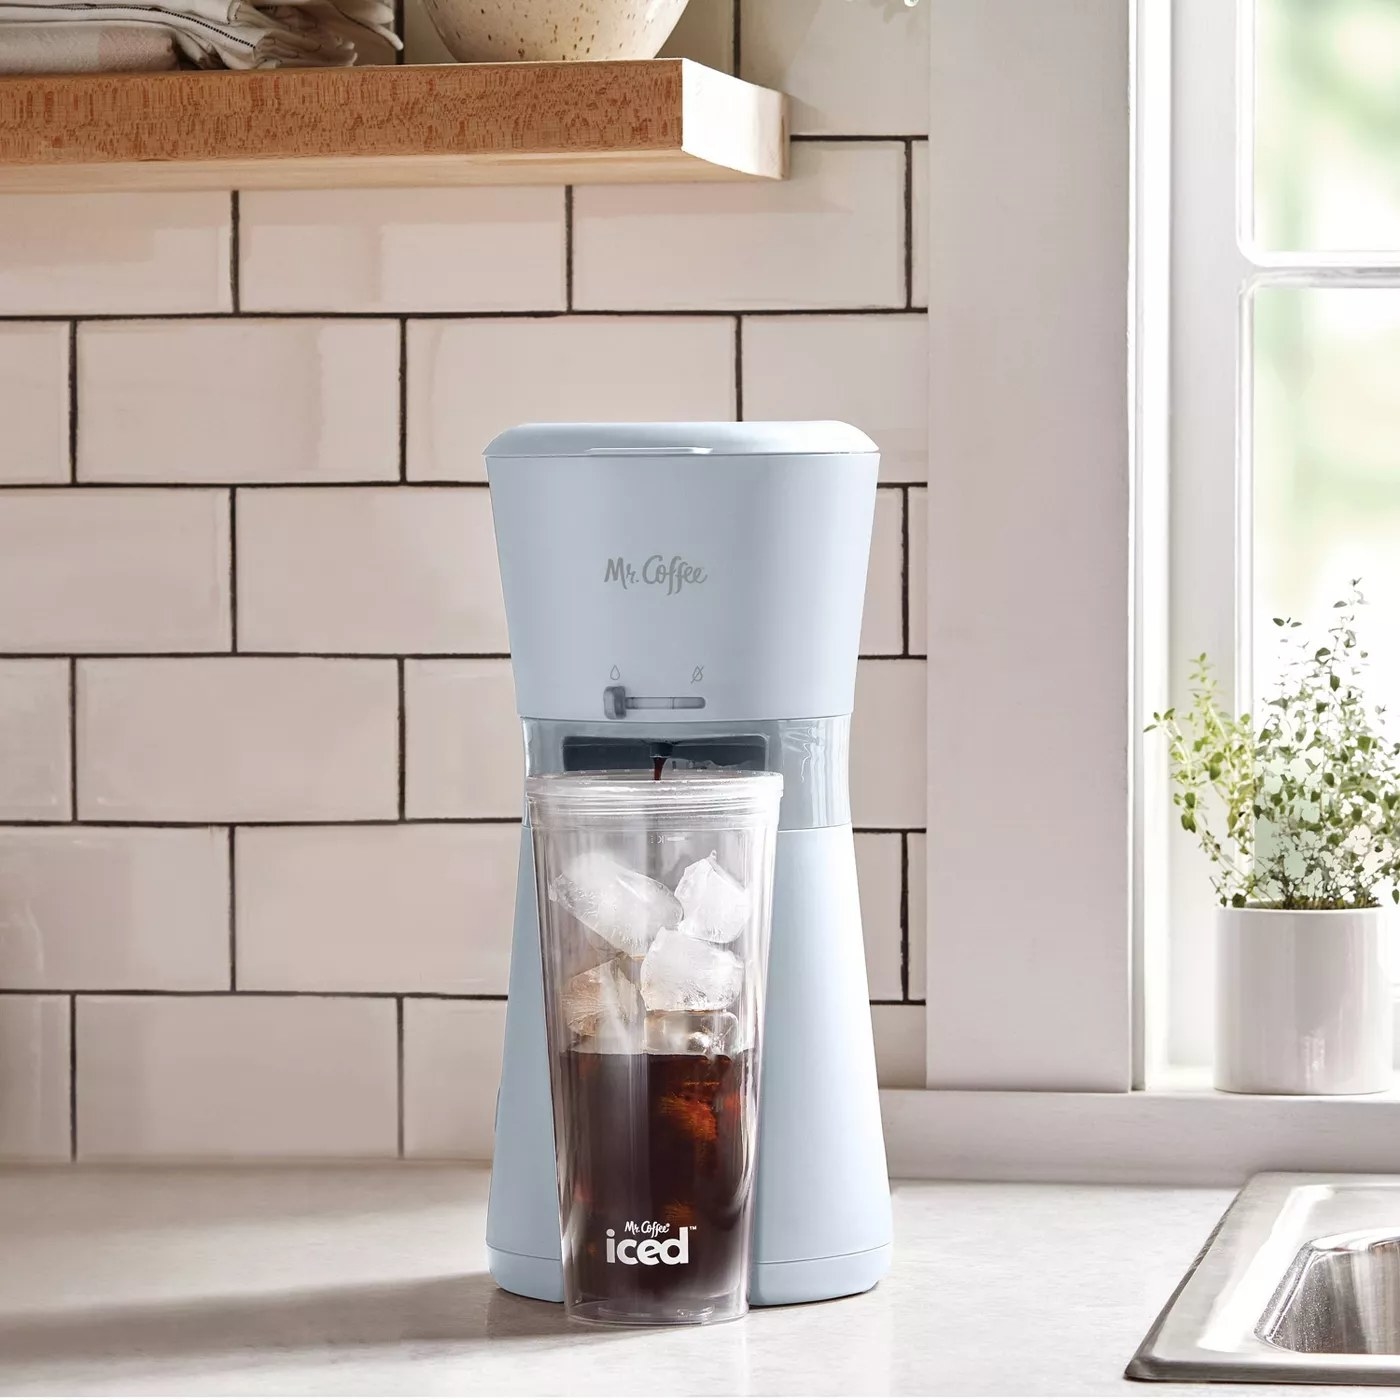 The iced coffee maker with a tumbler making a cup of coffee